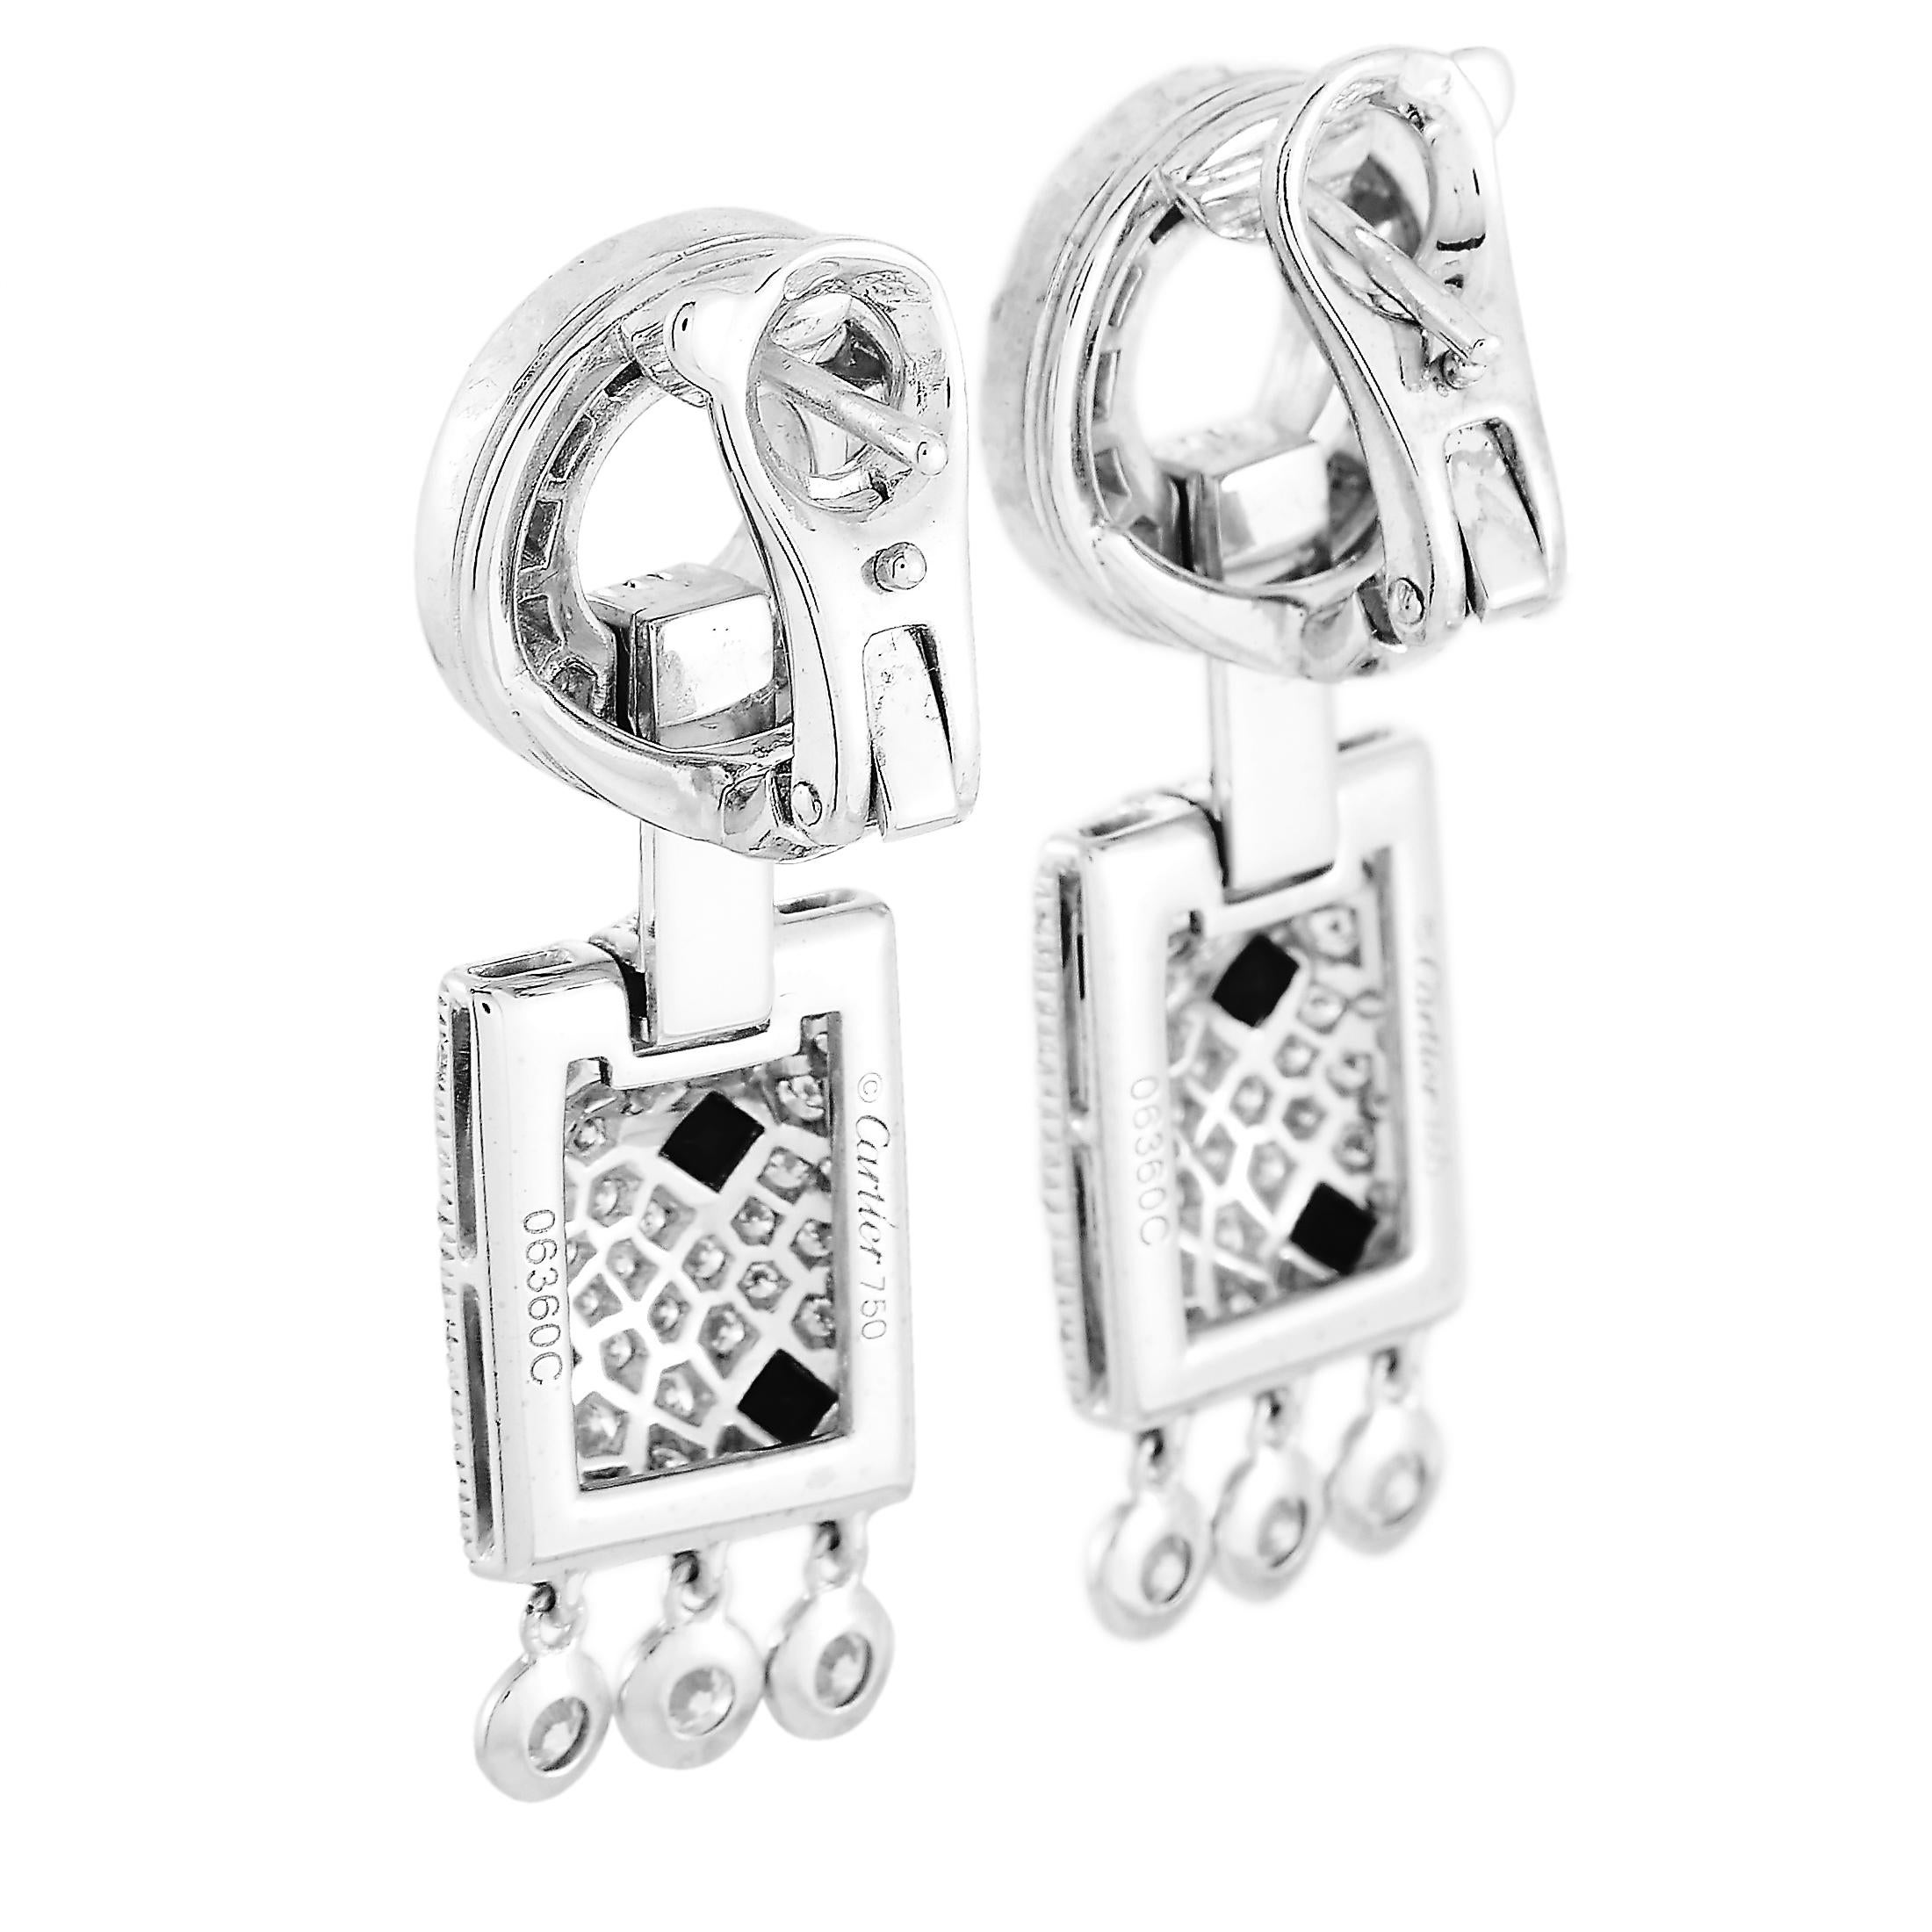 The Cartier “Panthère” earrings are made of 18K white gold and each of the two weighs 8.25 grams. They measure 1.37” in length and 0.65” in width. The pair is embellished with onyxes and with diamond stones that boast F color and VVS clarity and